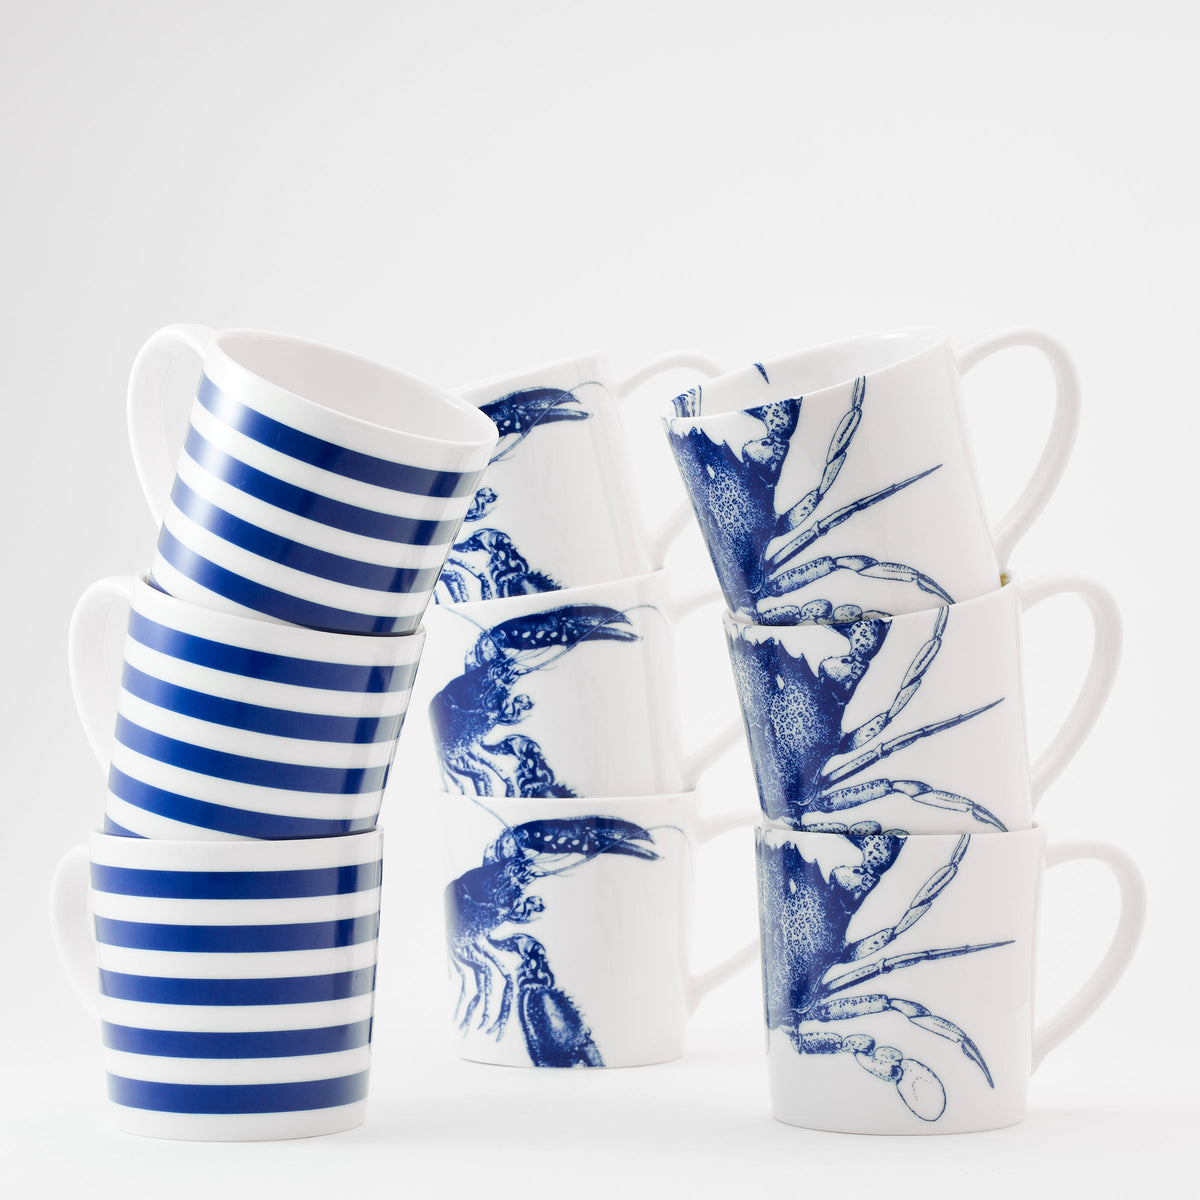 A stack of Lobster Mug Blue from Caskata Artisanal Home, perfect for enjoying a hot beverage.